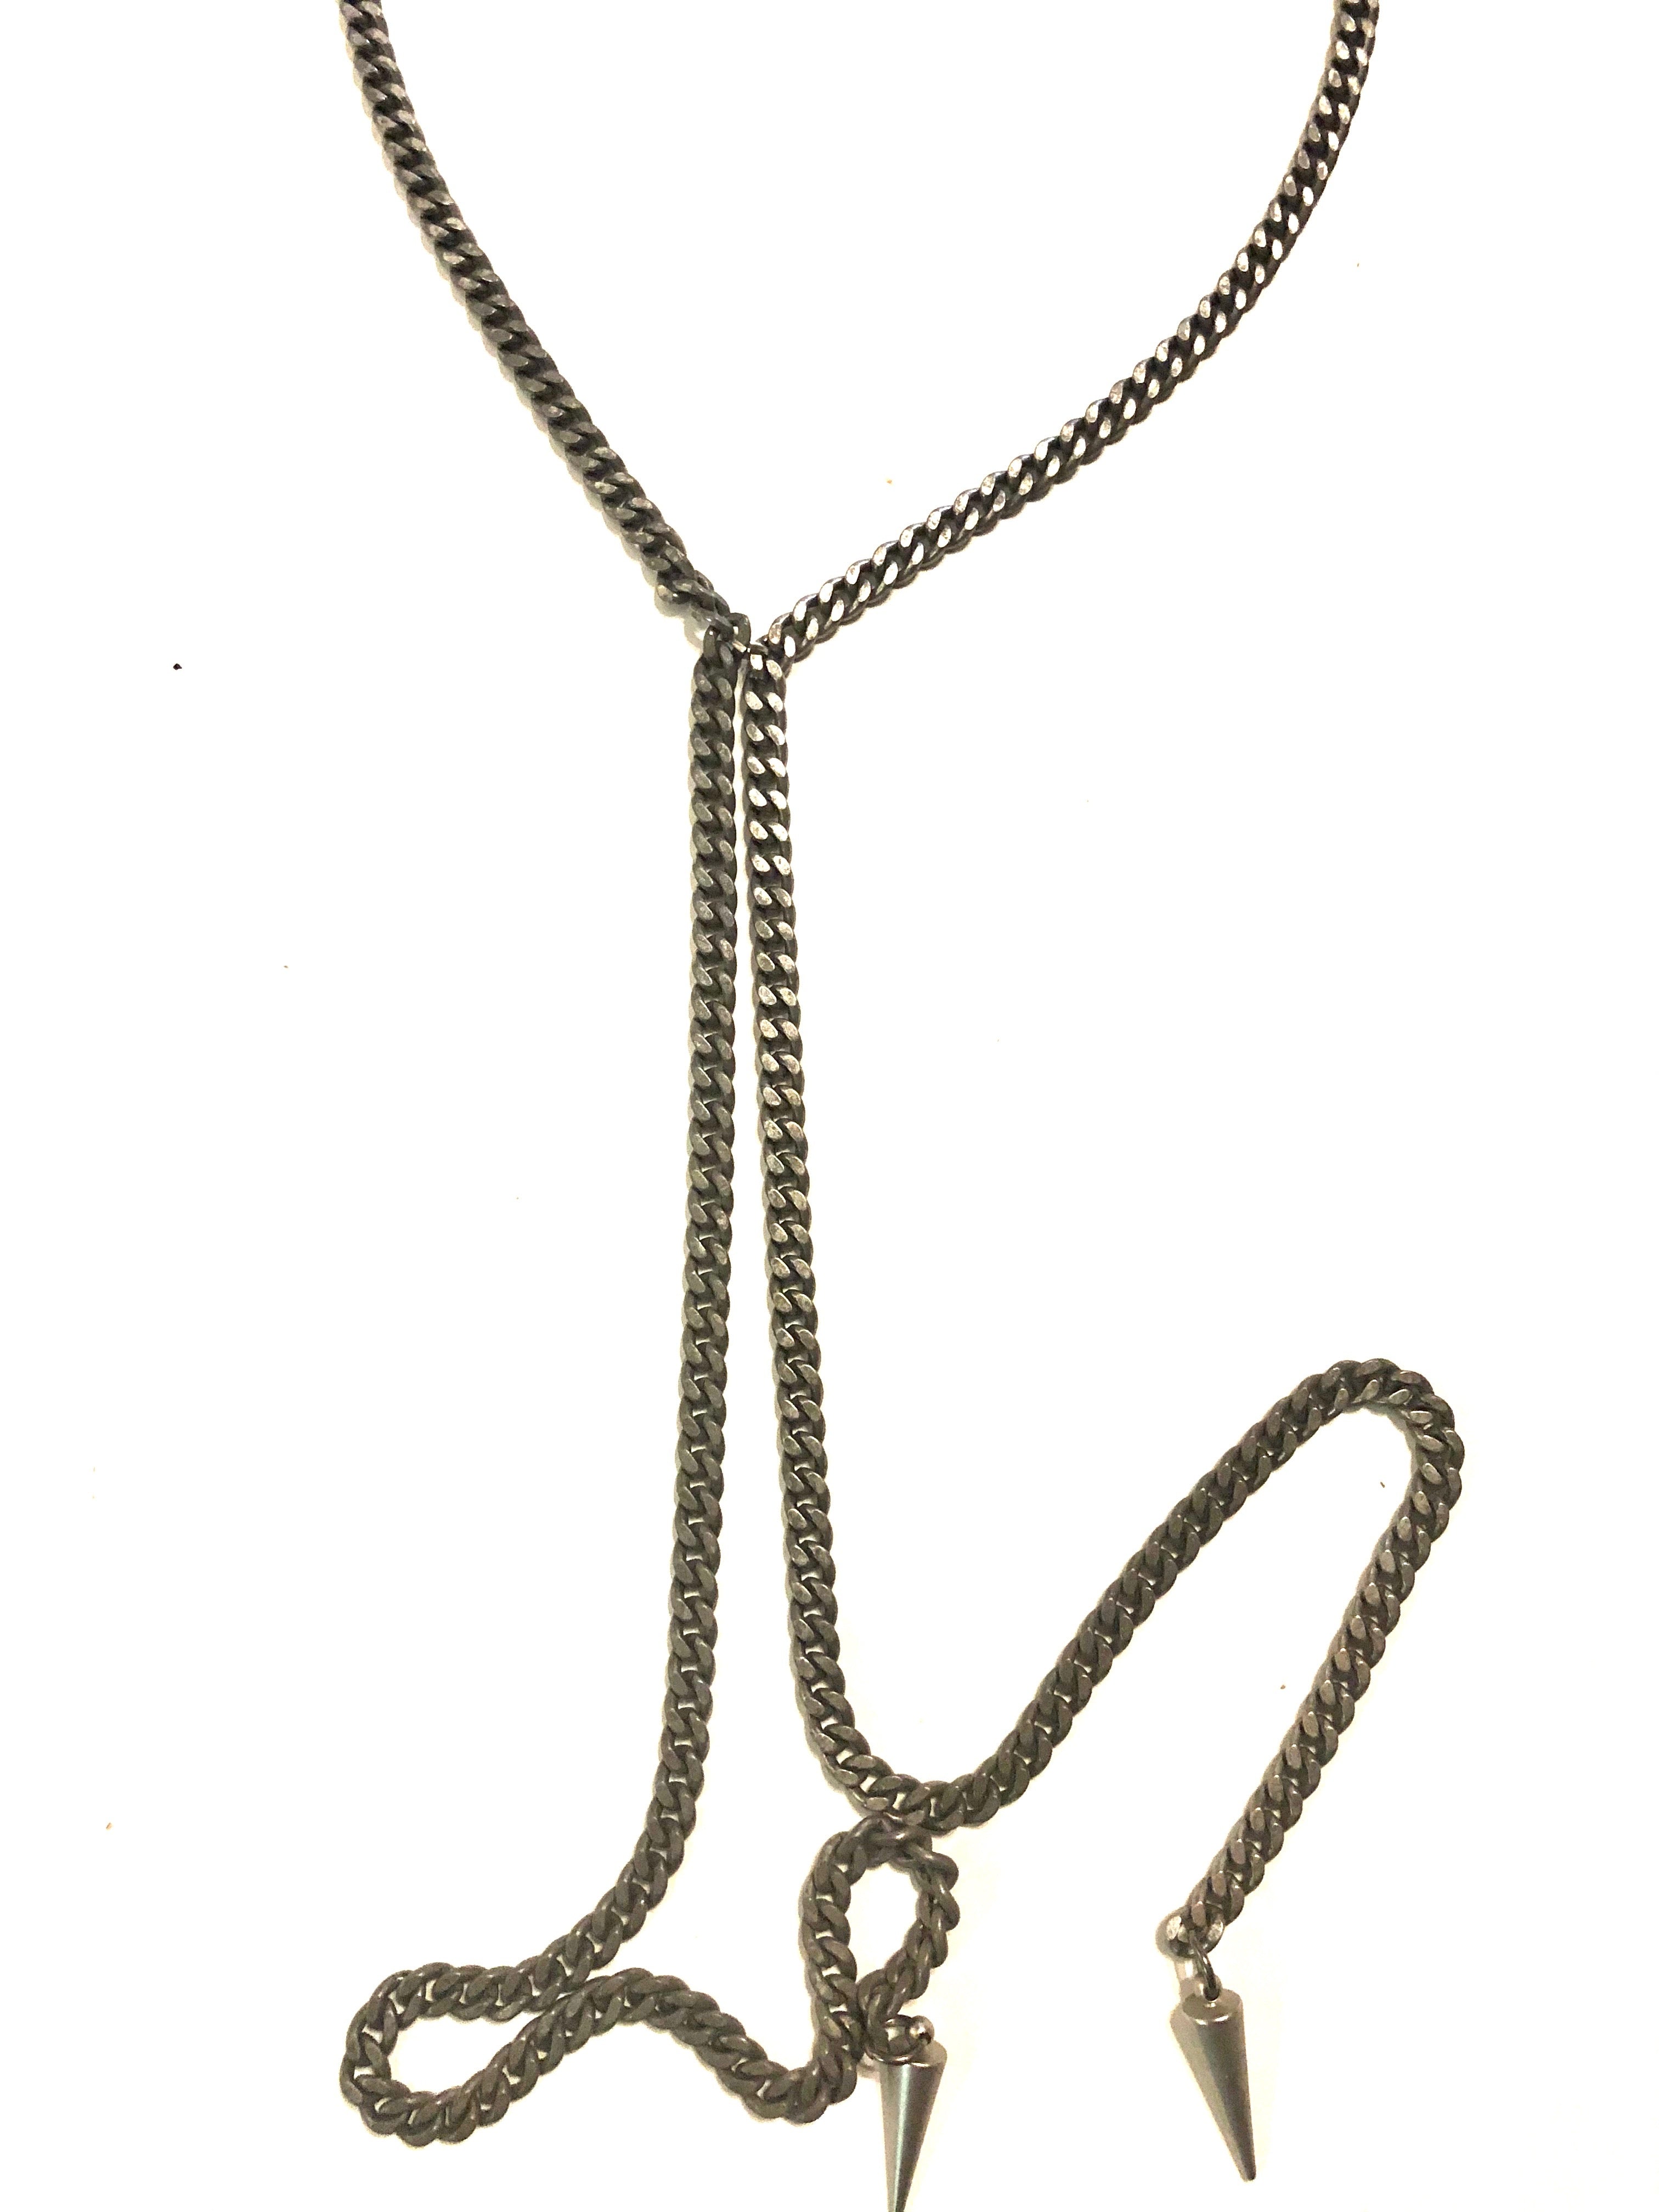 Cody - Y-necklace with spike drops